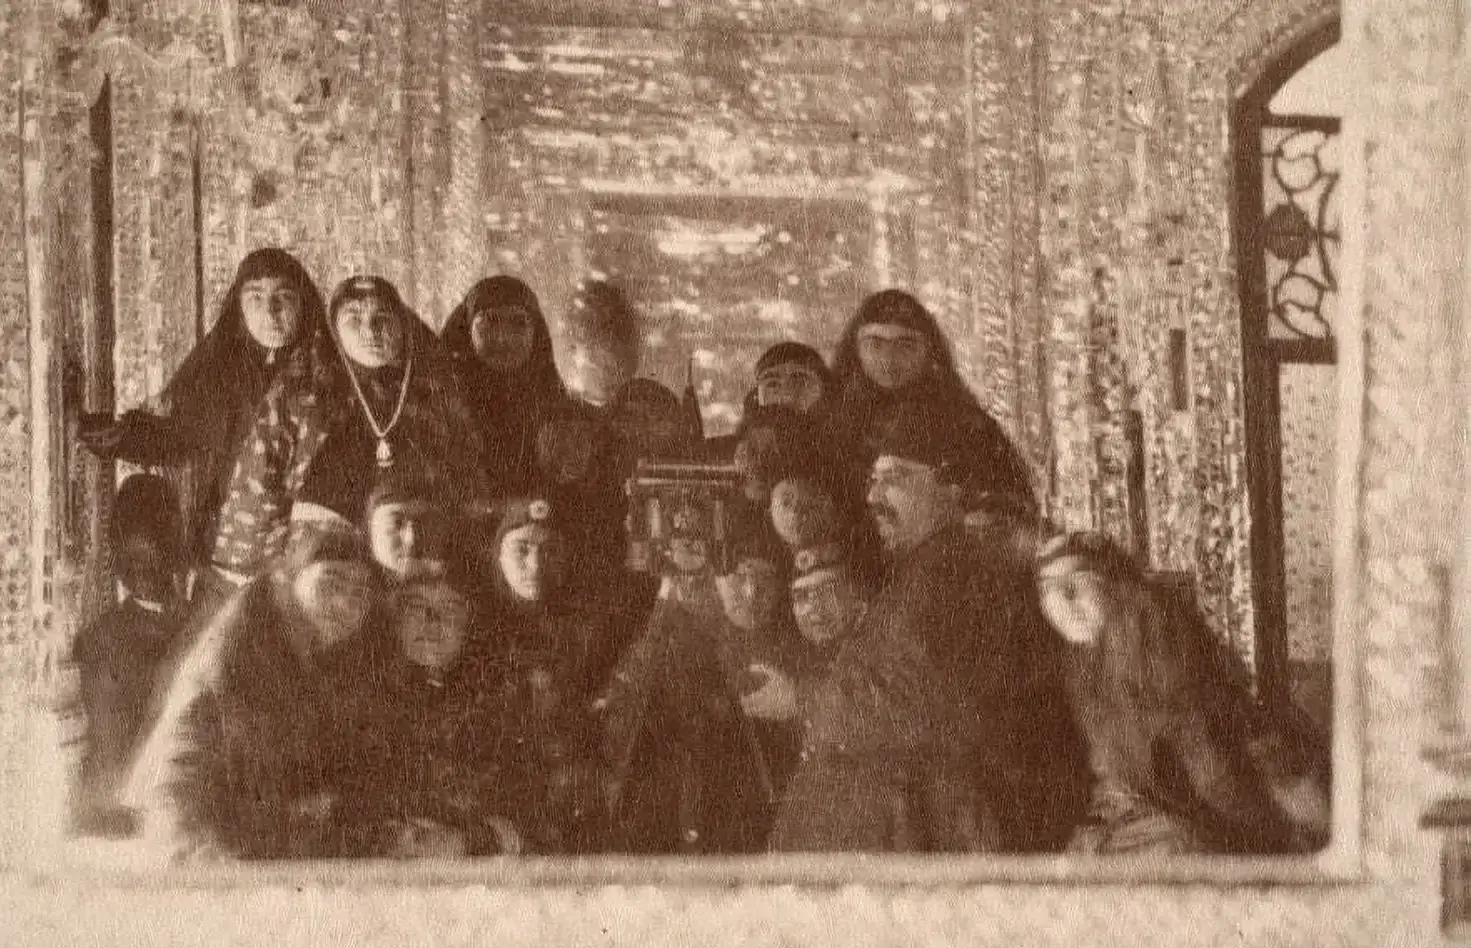 Persian emperor Naser al-Din Shah Qajar stands next to a camera, taking a picture into a mirror. He is standing surrounded by about 17 of his wives. They are in what appears to be a regal palace.